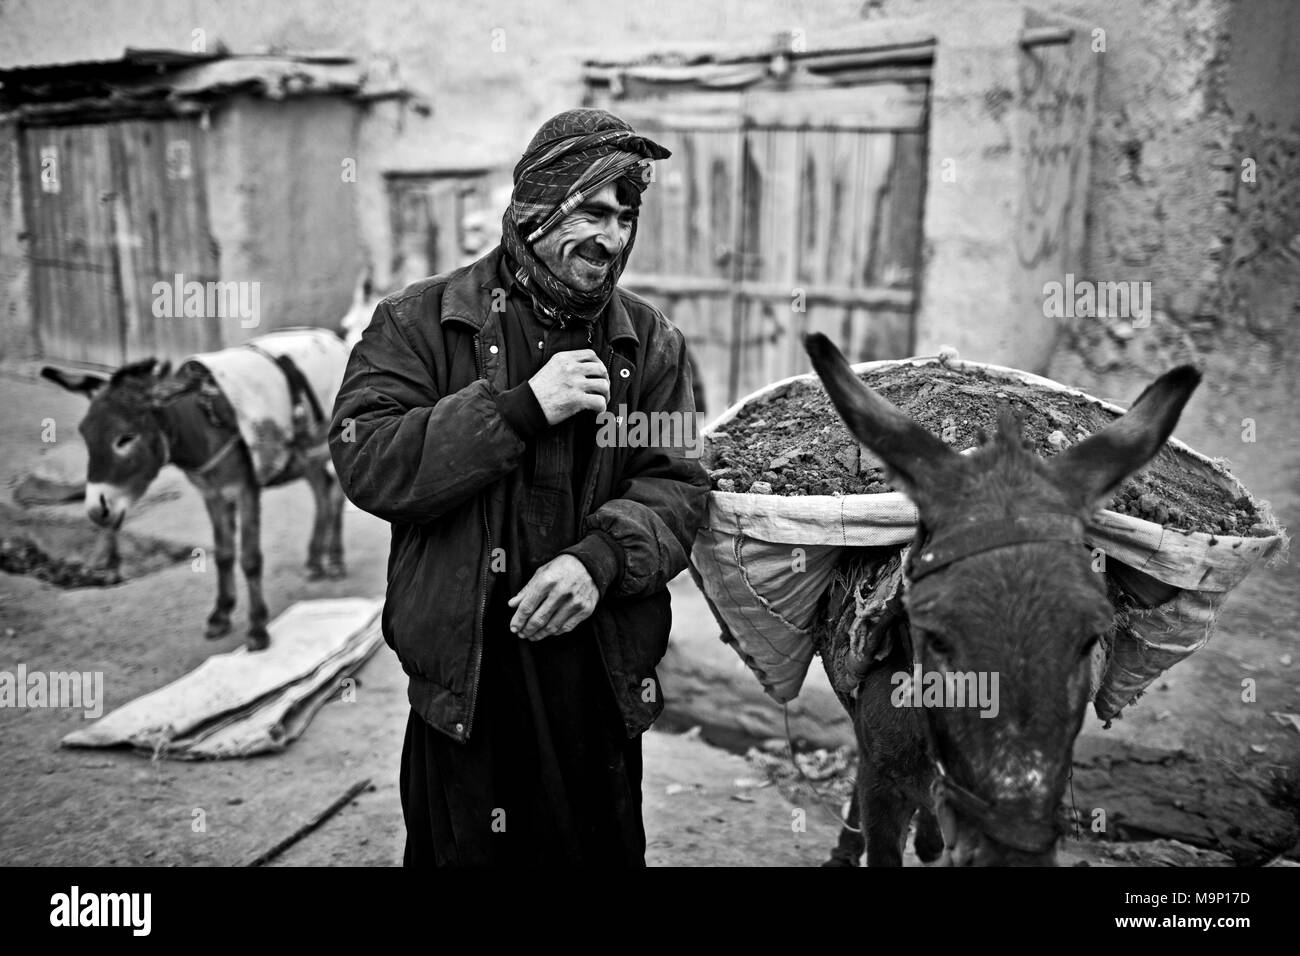 An Afghan laborer takes a break while loading his donkeys in Kabul, Afghanistan, Friday, November 20, 2009. Stock Photo